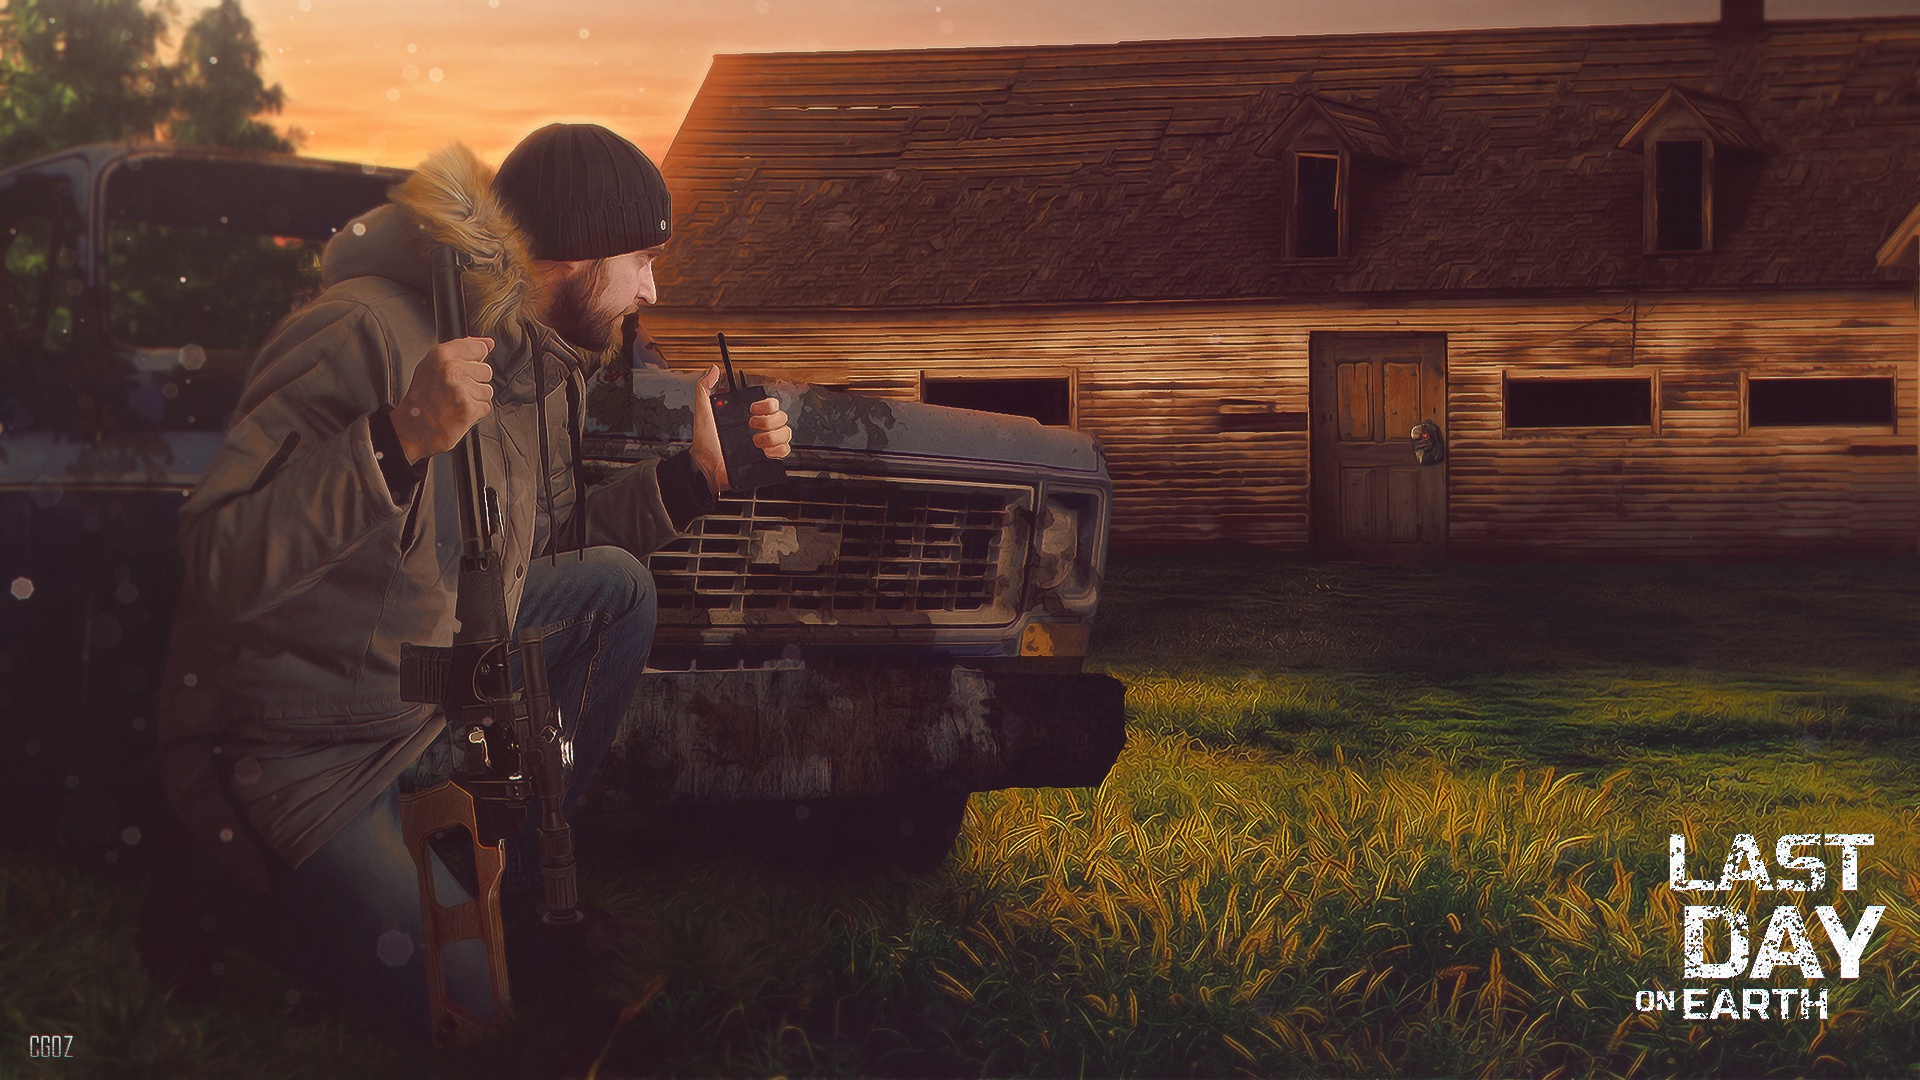 Ласт last. Ласт Дэй. Last Day on Earth: Survival. Игра last Day on Earth. Last Day on Earth Survival Wallpaper.